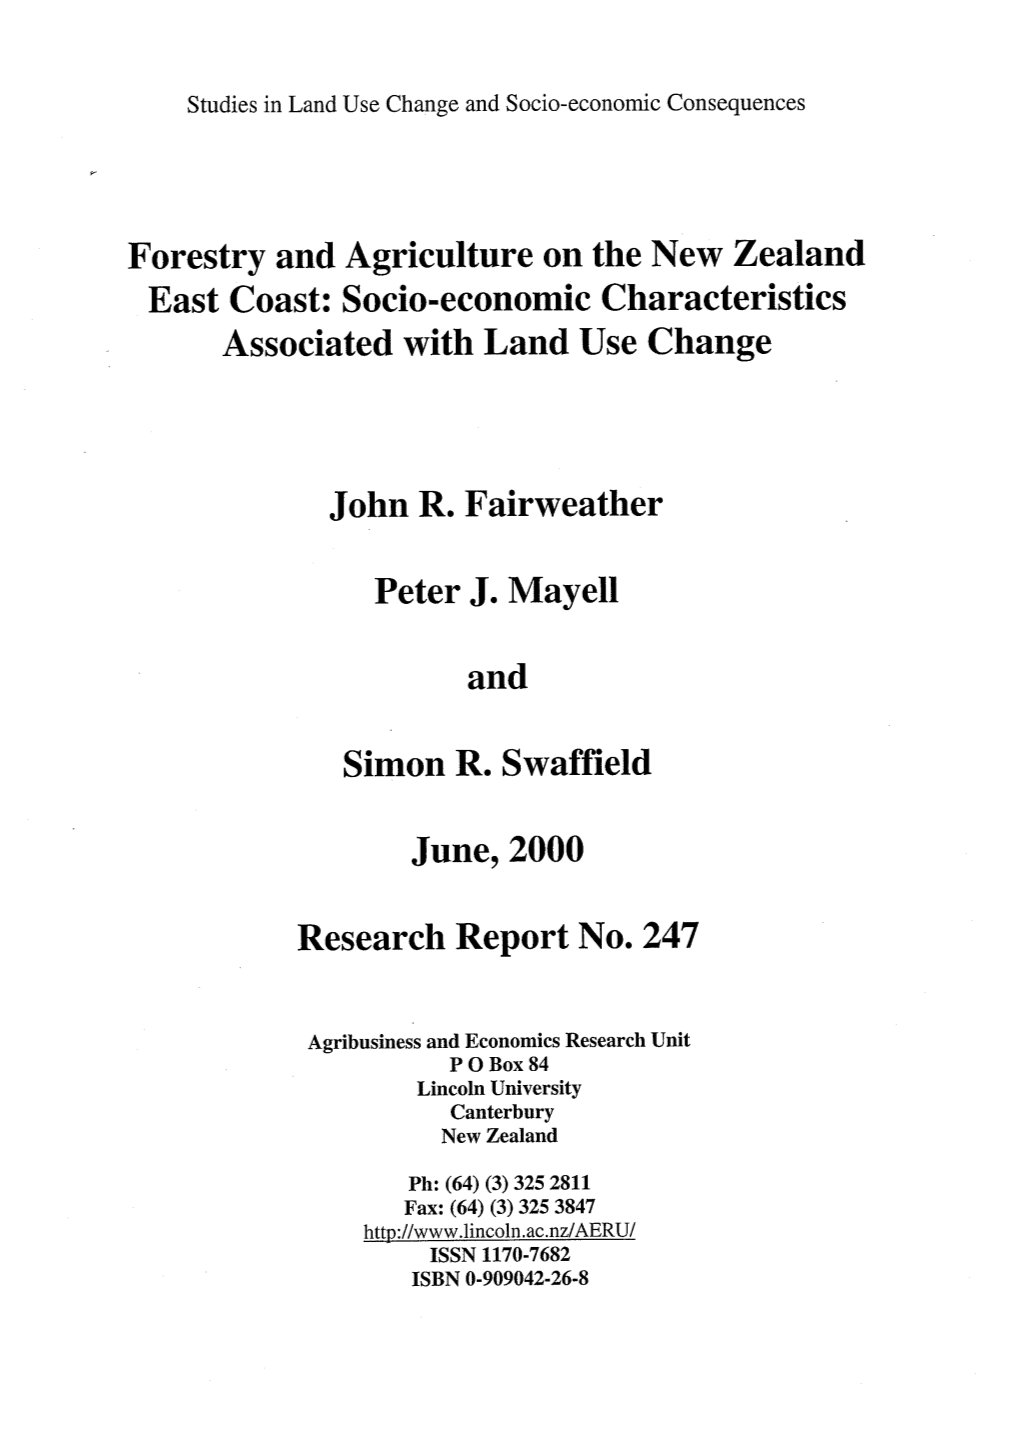 Forestry and Agriculture on the New Zealand East Coast: Socio-Economic Characteristics Associated with Land Use Change